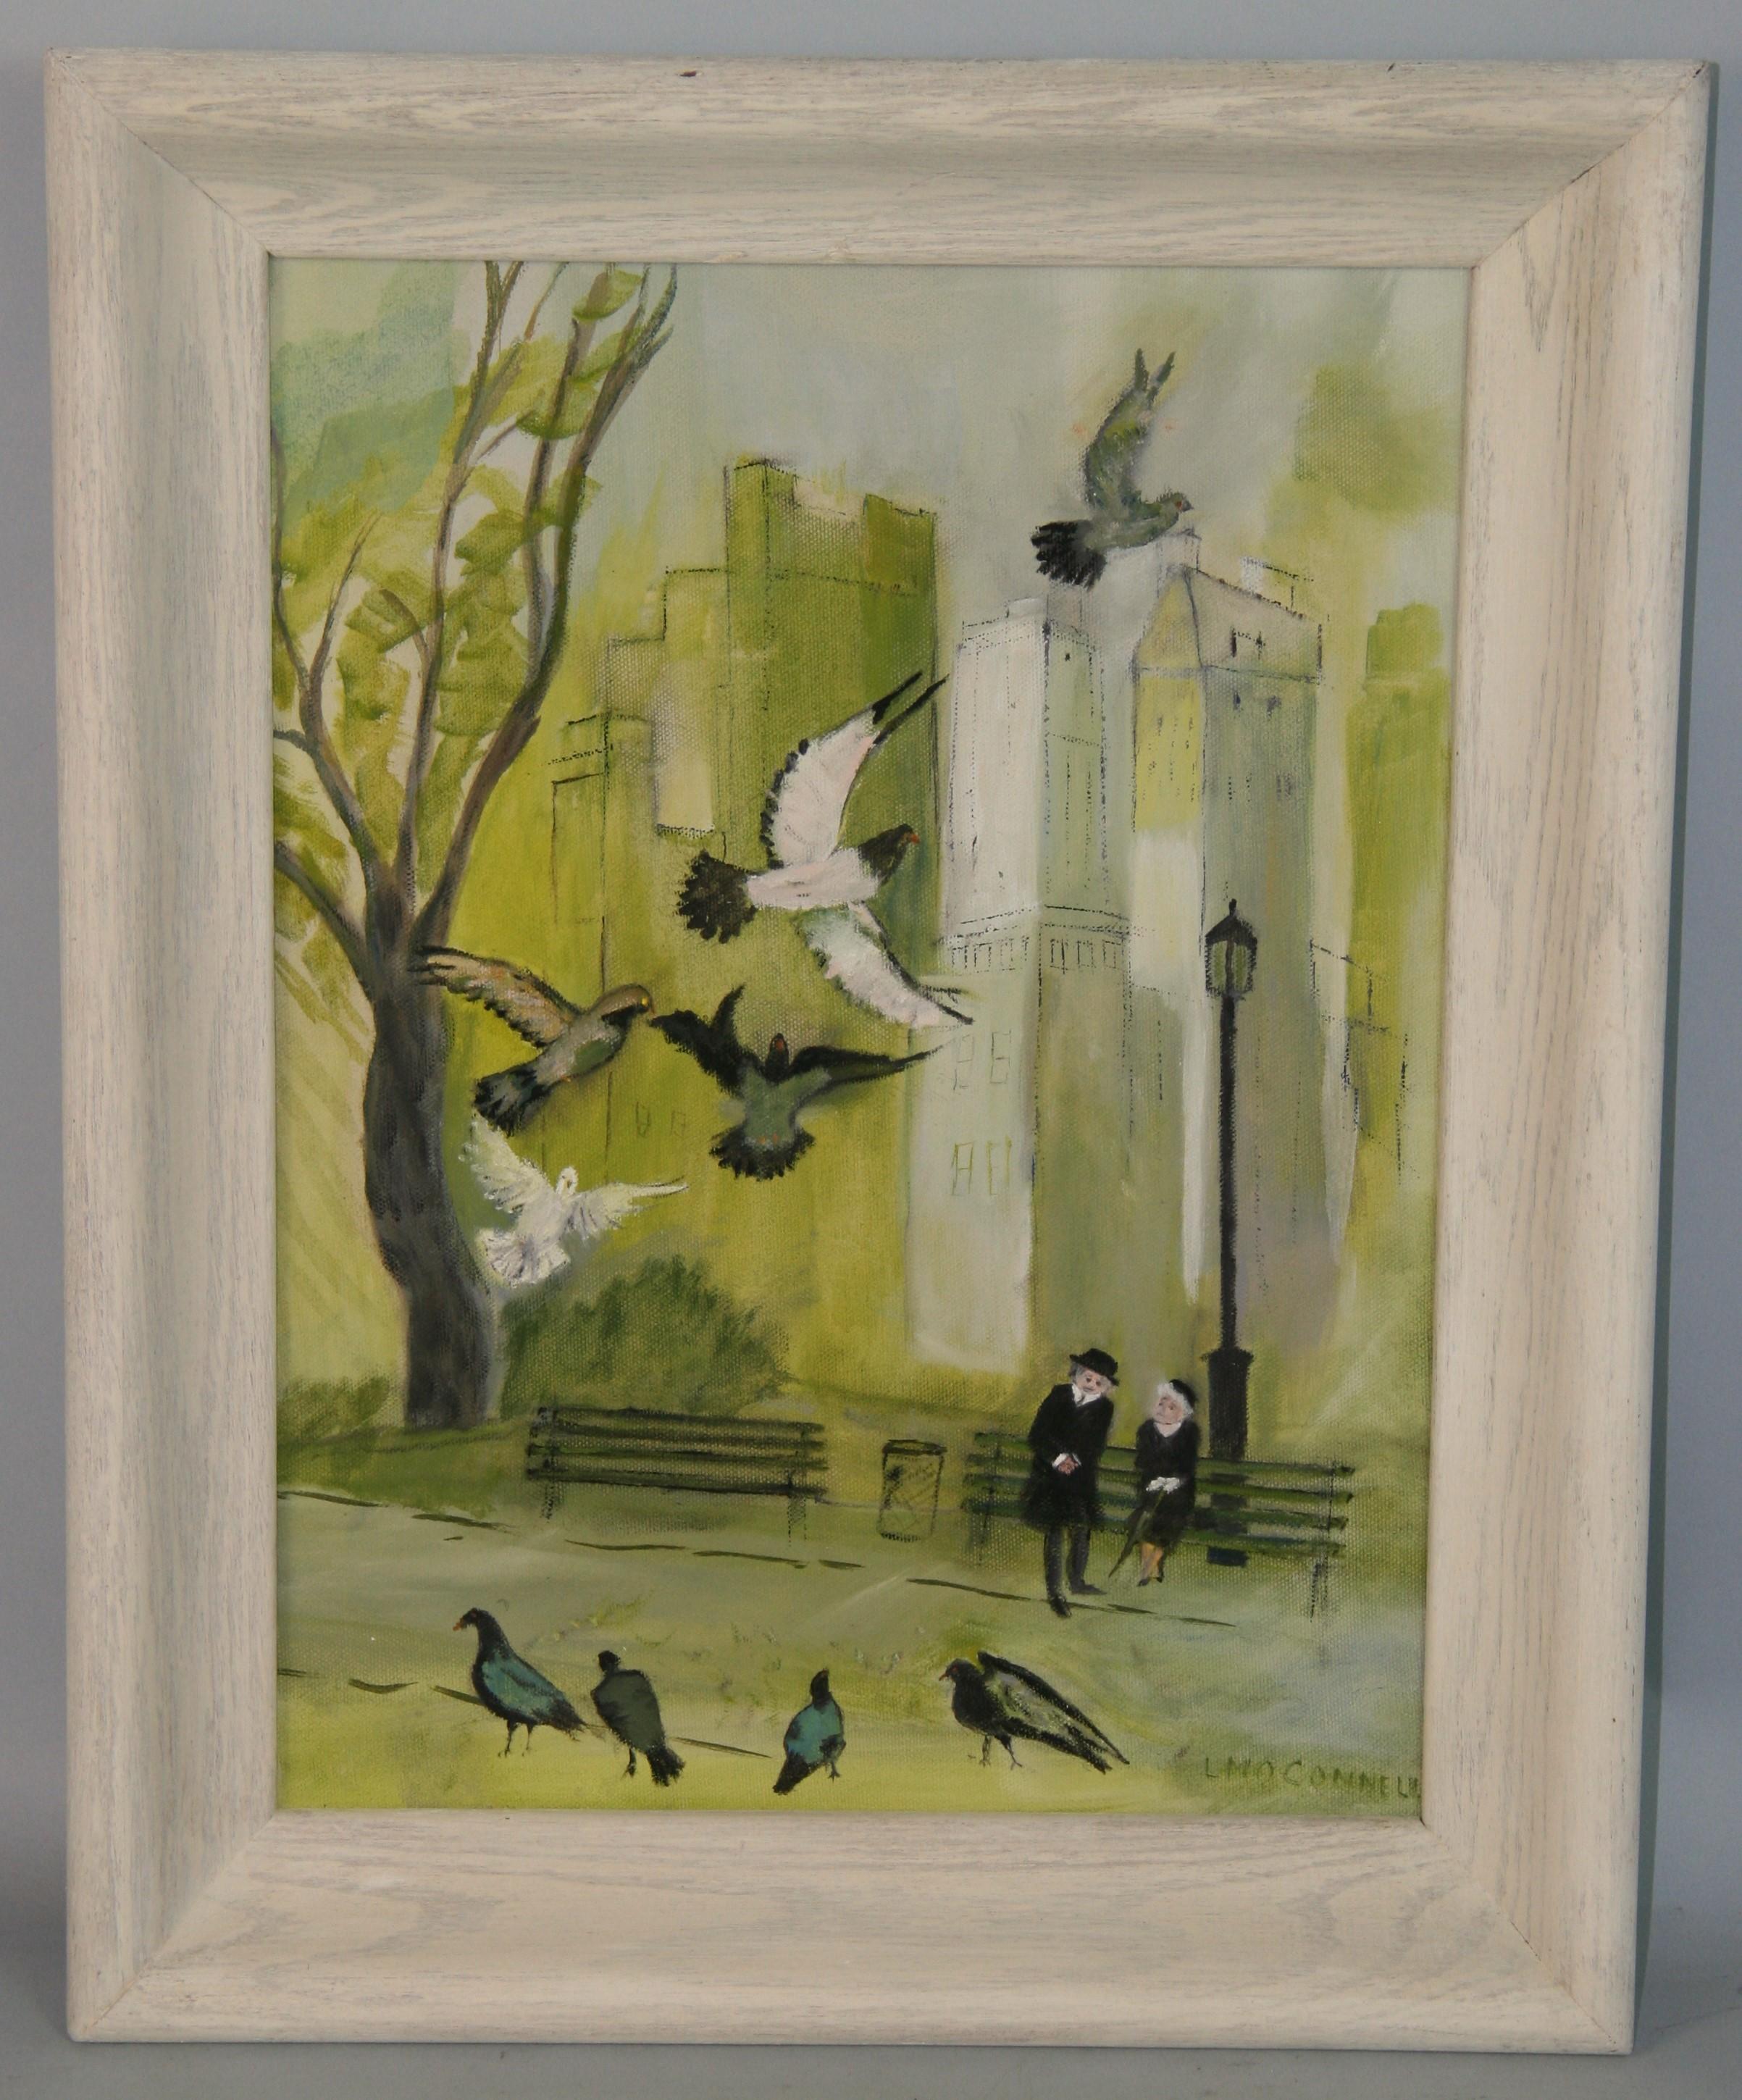 Unknown Landscape Painting - Vintage American City Scape "Birds in the Park" 